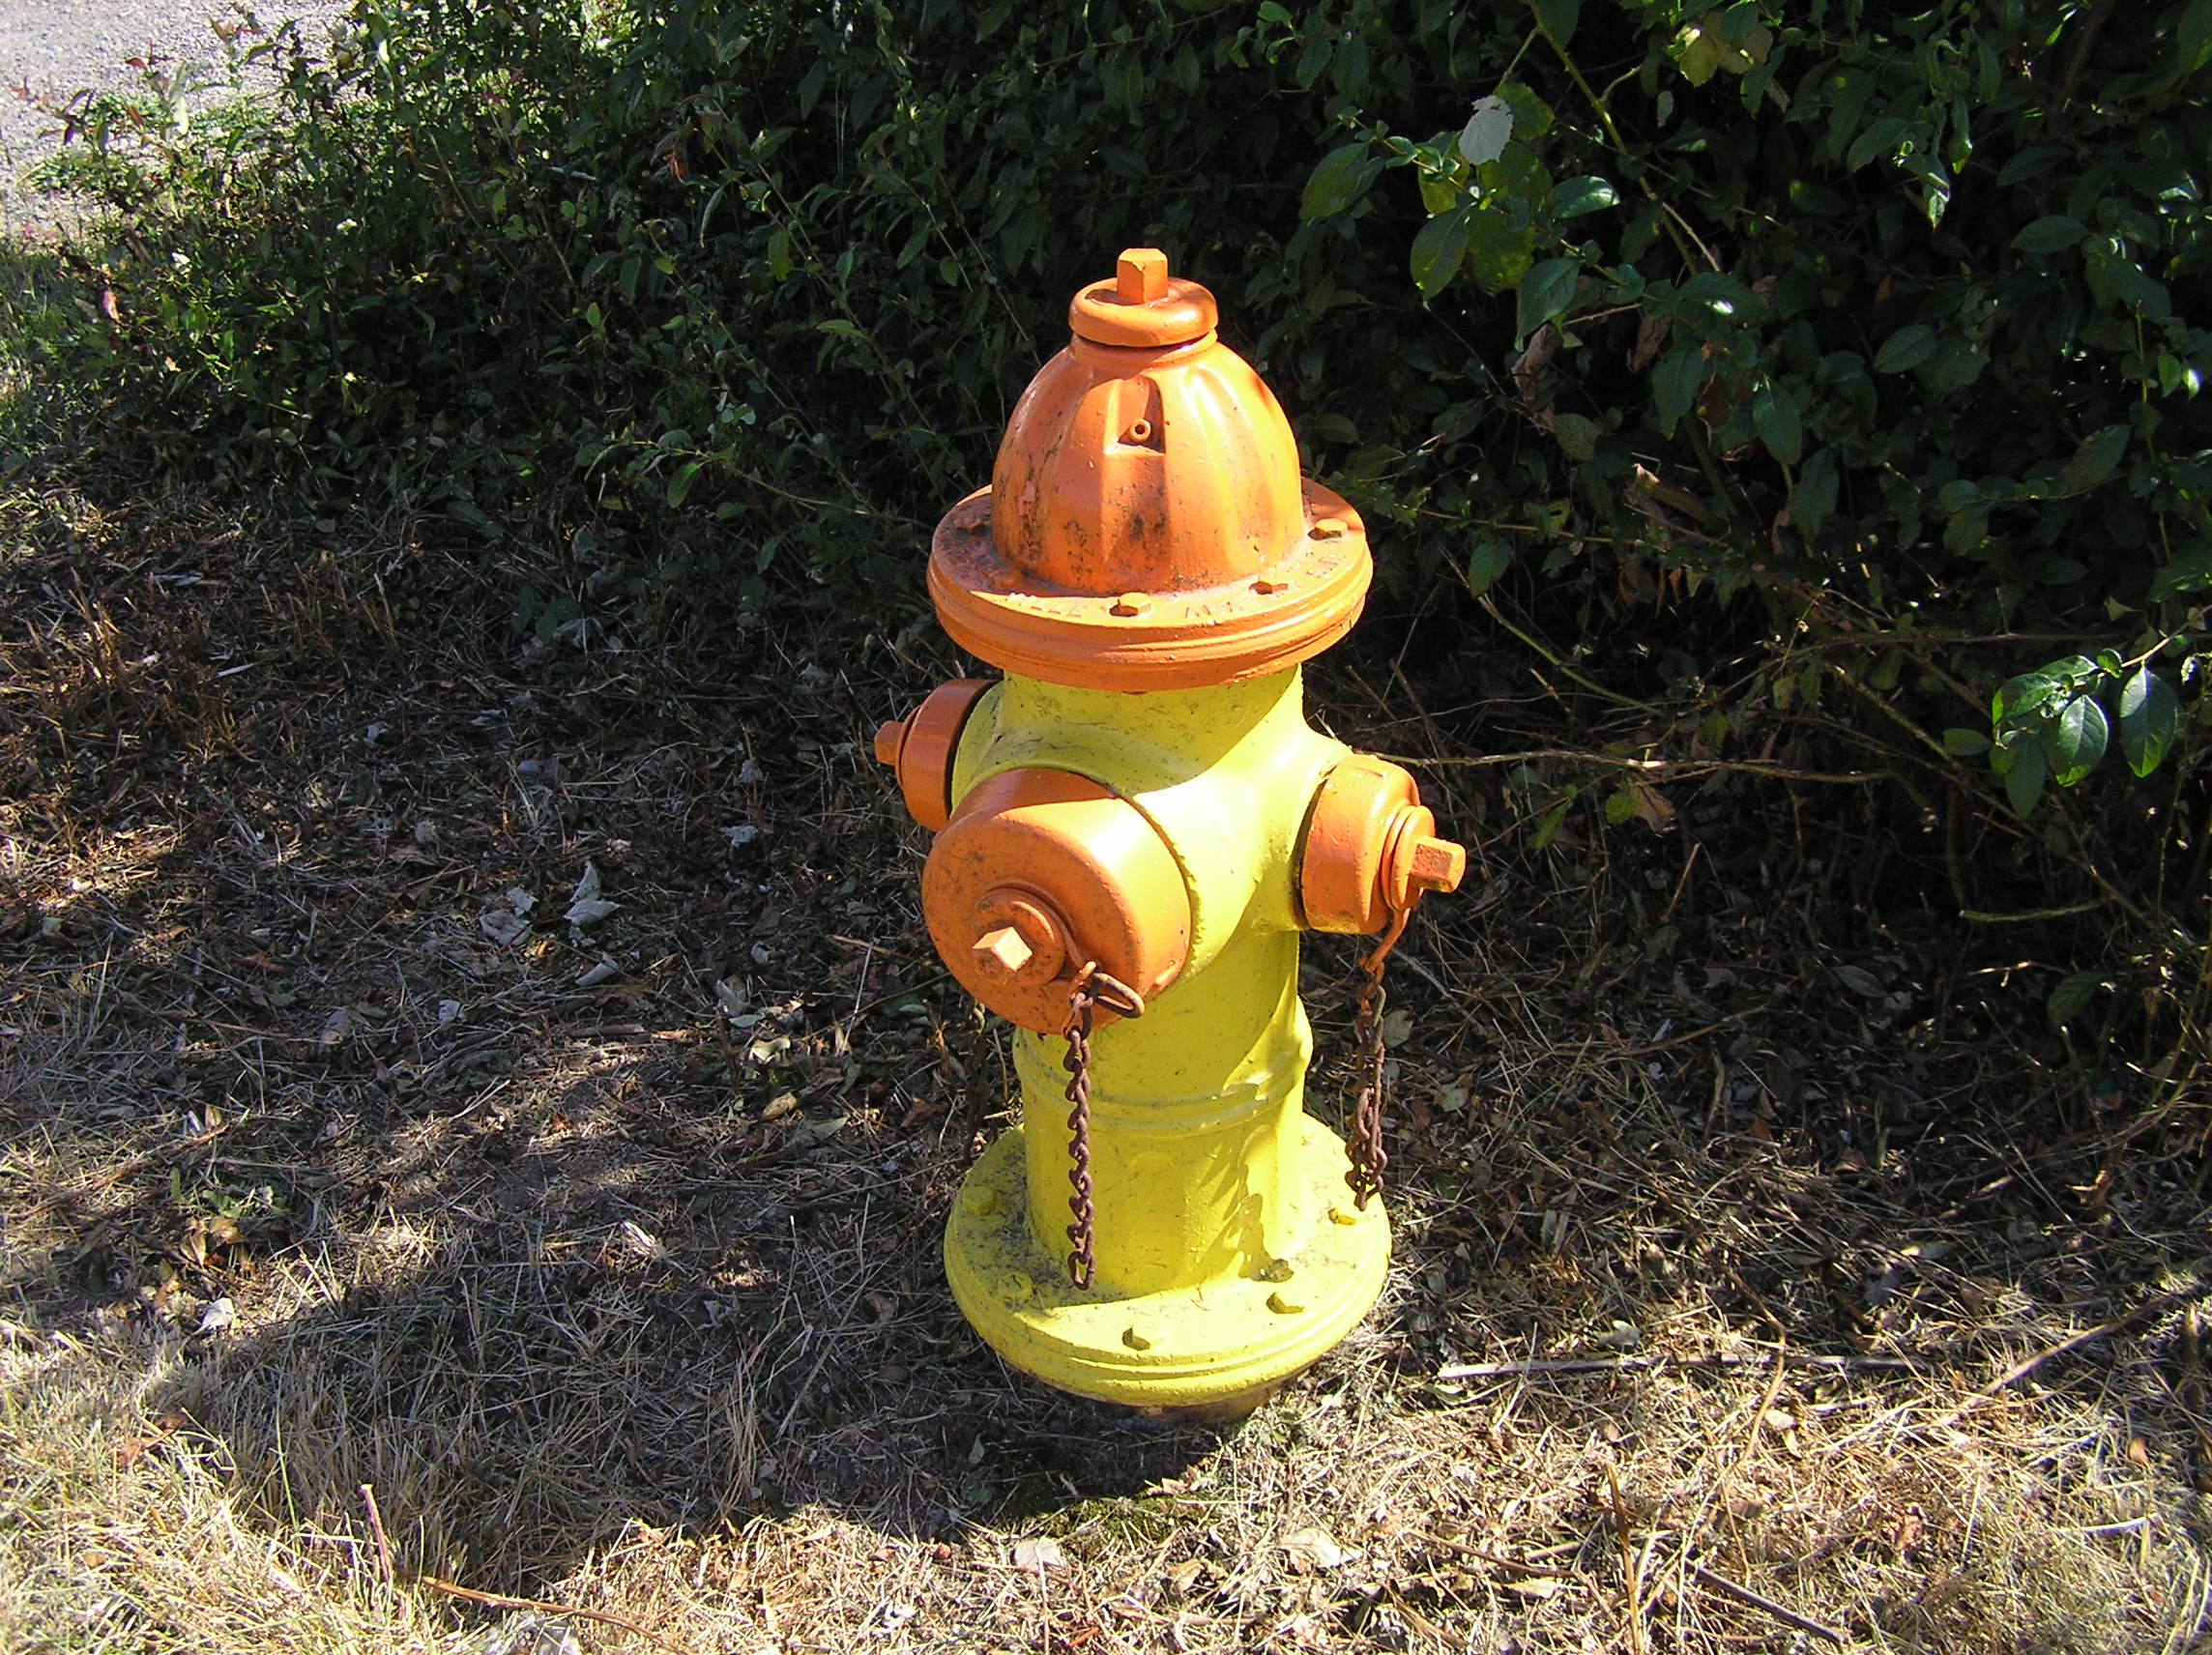 Fire hydrant on the edge of the road.